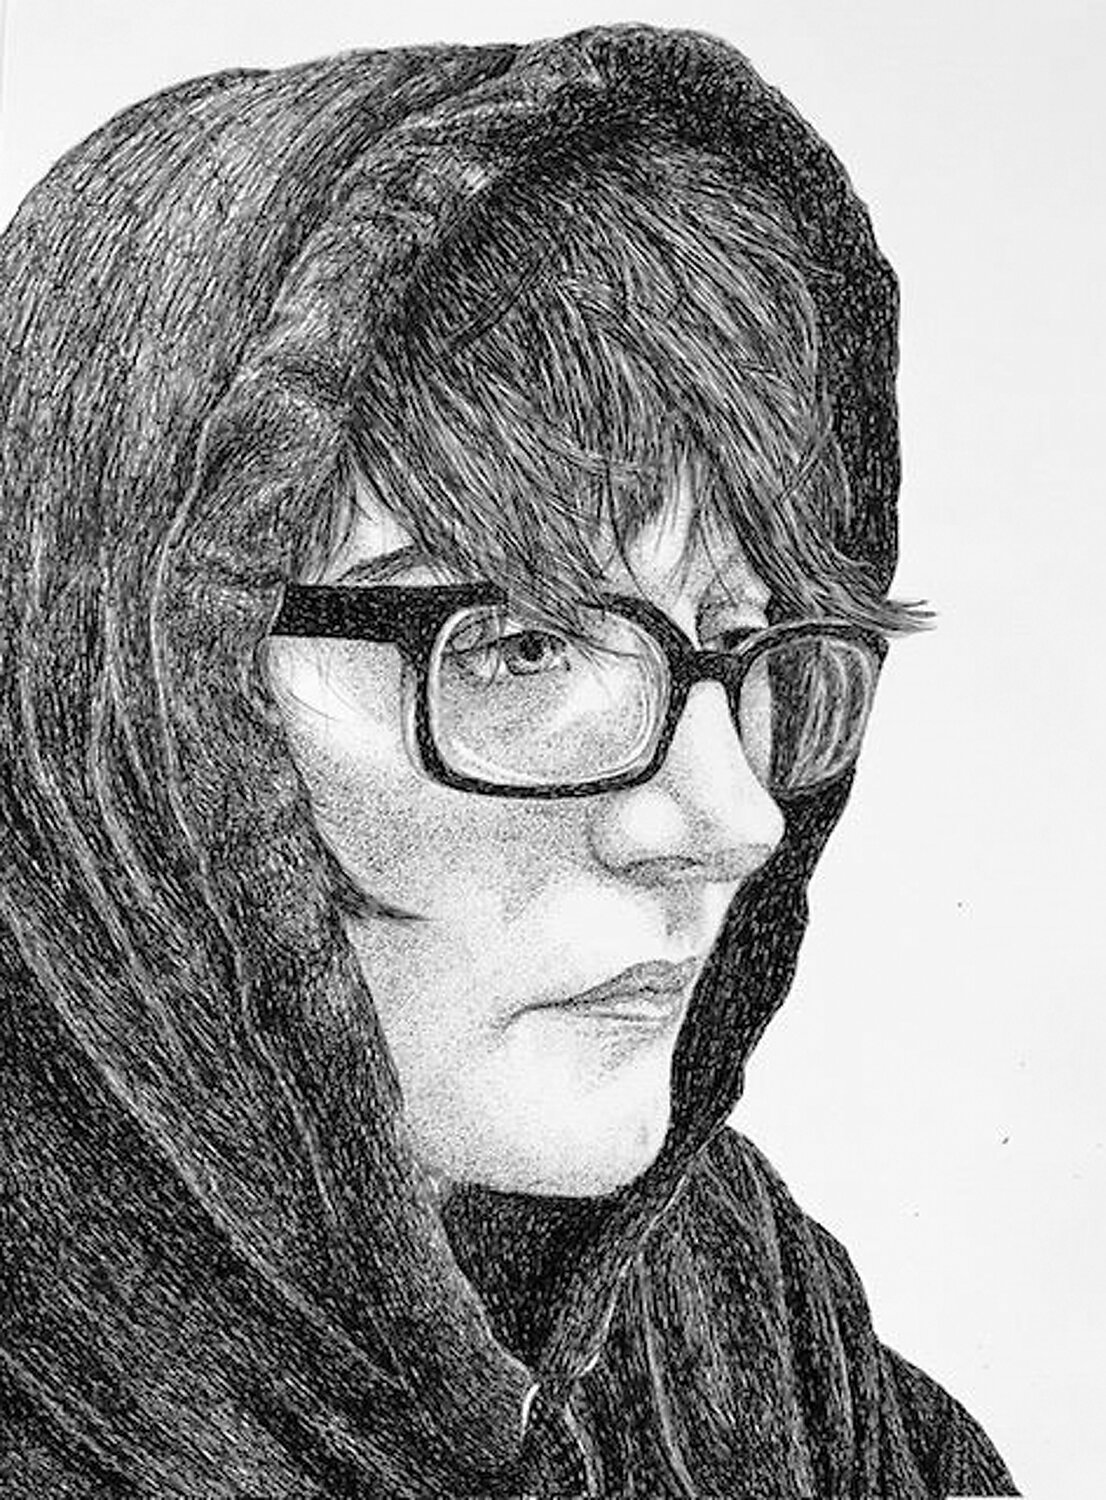 Honorable Mention “Portrait in Black and White” by Rylee Frey of Truman High School is a work in pen and ink.